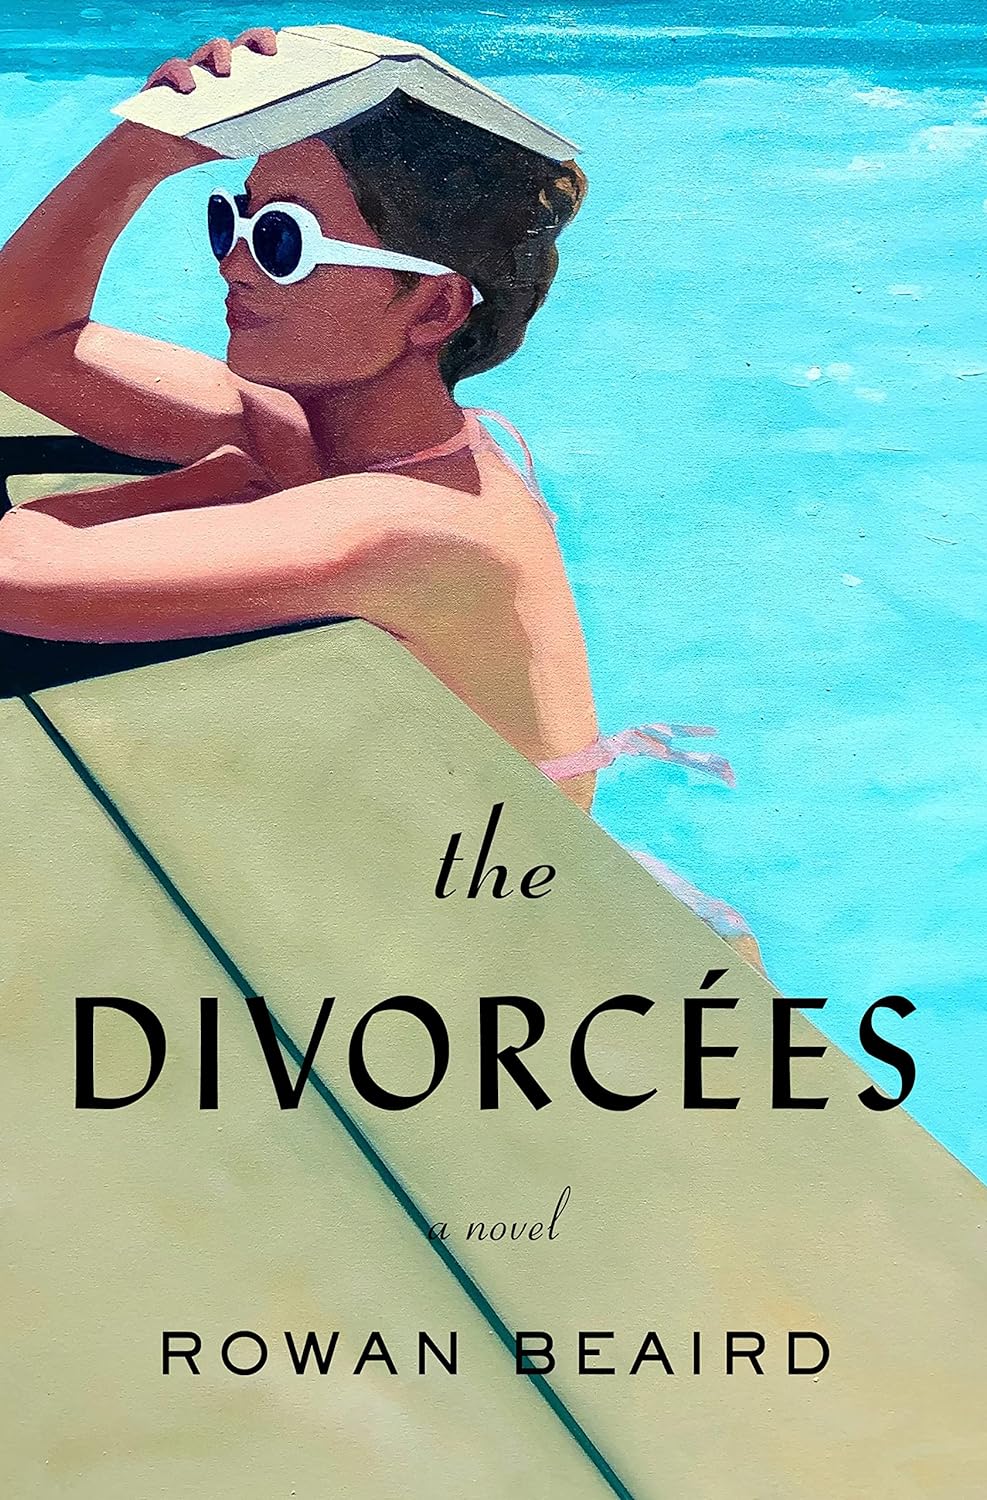 Image for "The Divorcées"